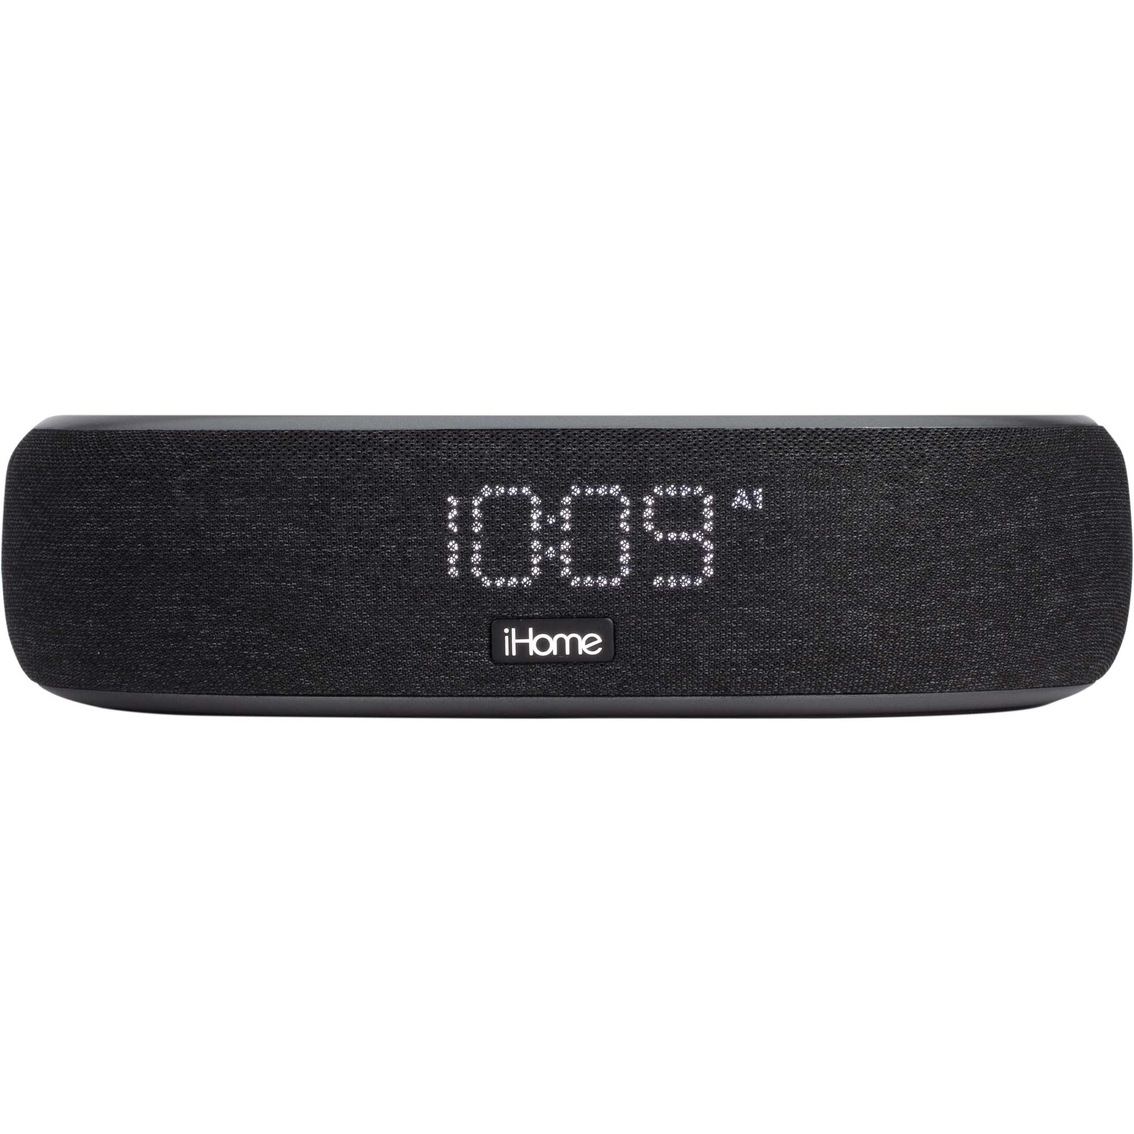 iHome TimeBoost Bluetooth Stereo Alarm Clock with Speakerphone and USB Charging - Image 3 of 10